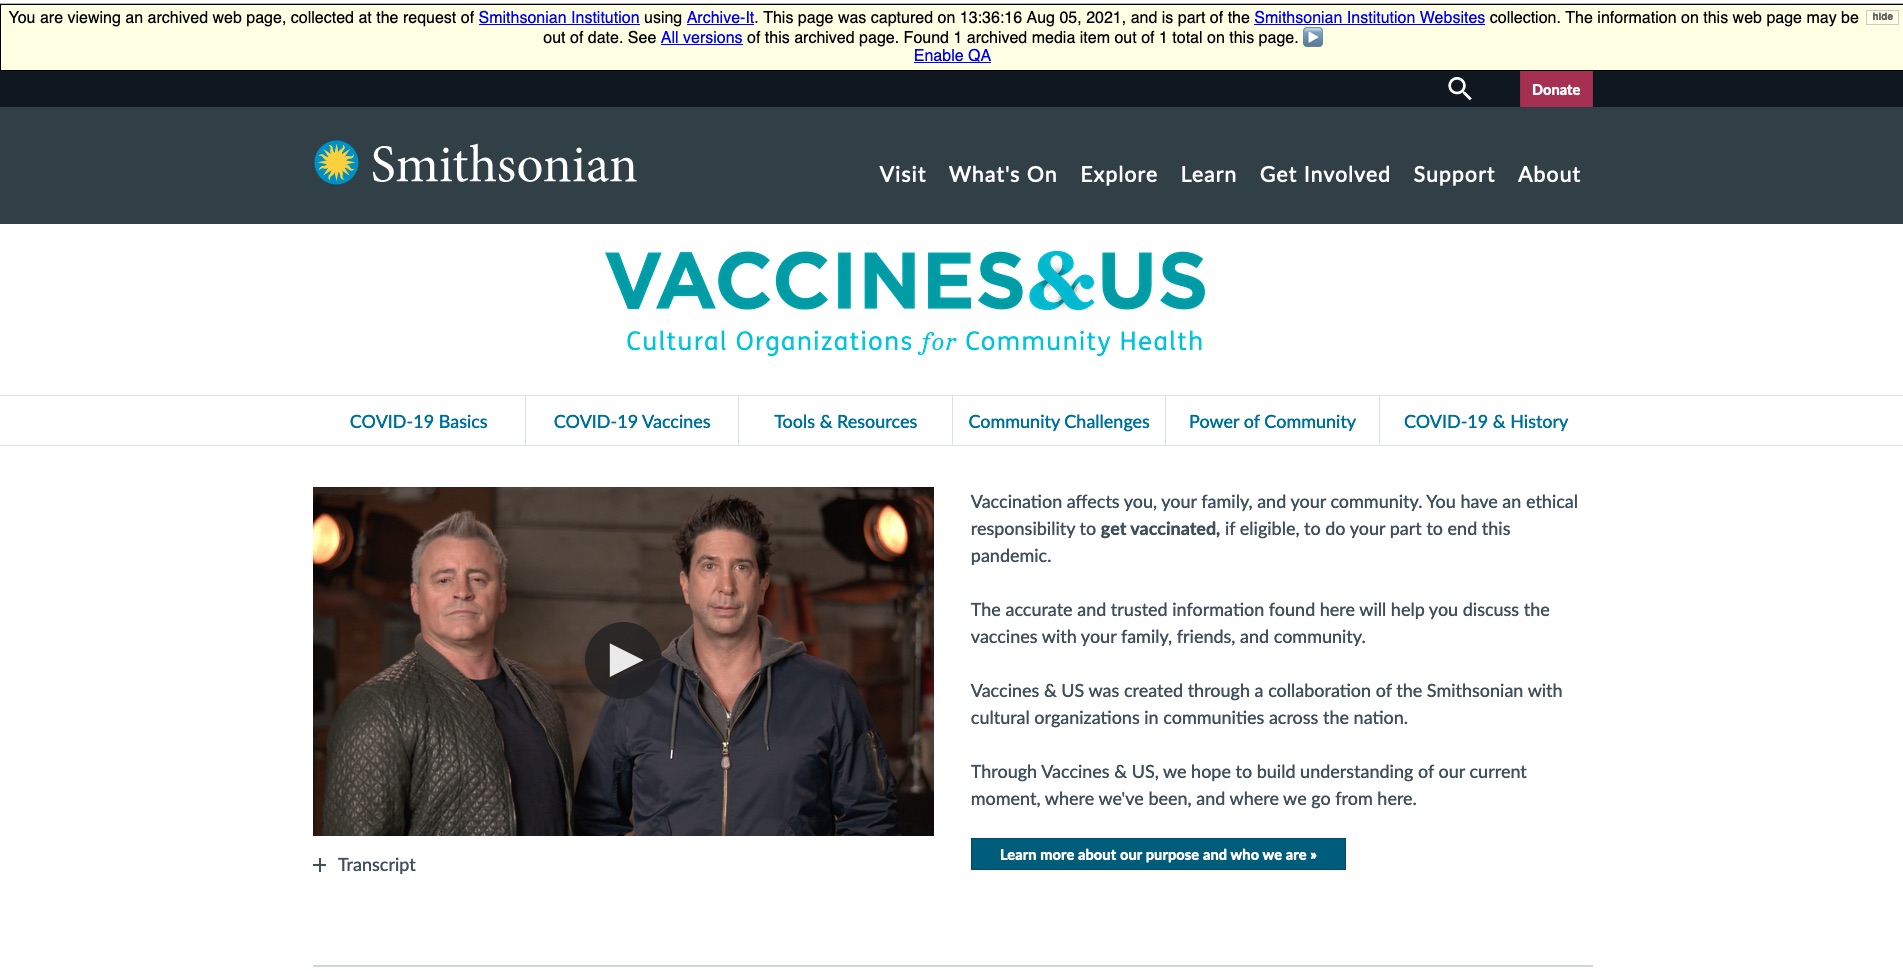 Screenshot of the Vaccines and US archived website that shows a banner noting it was archived August